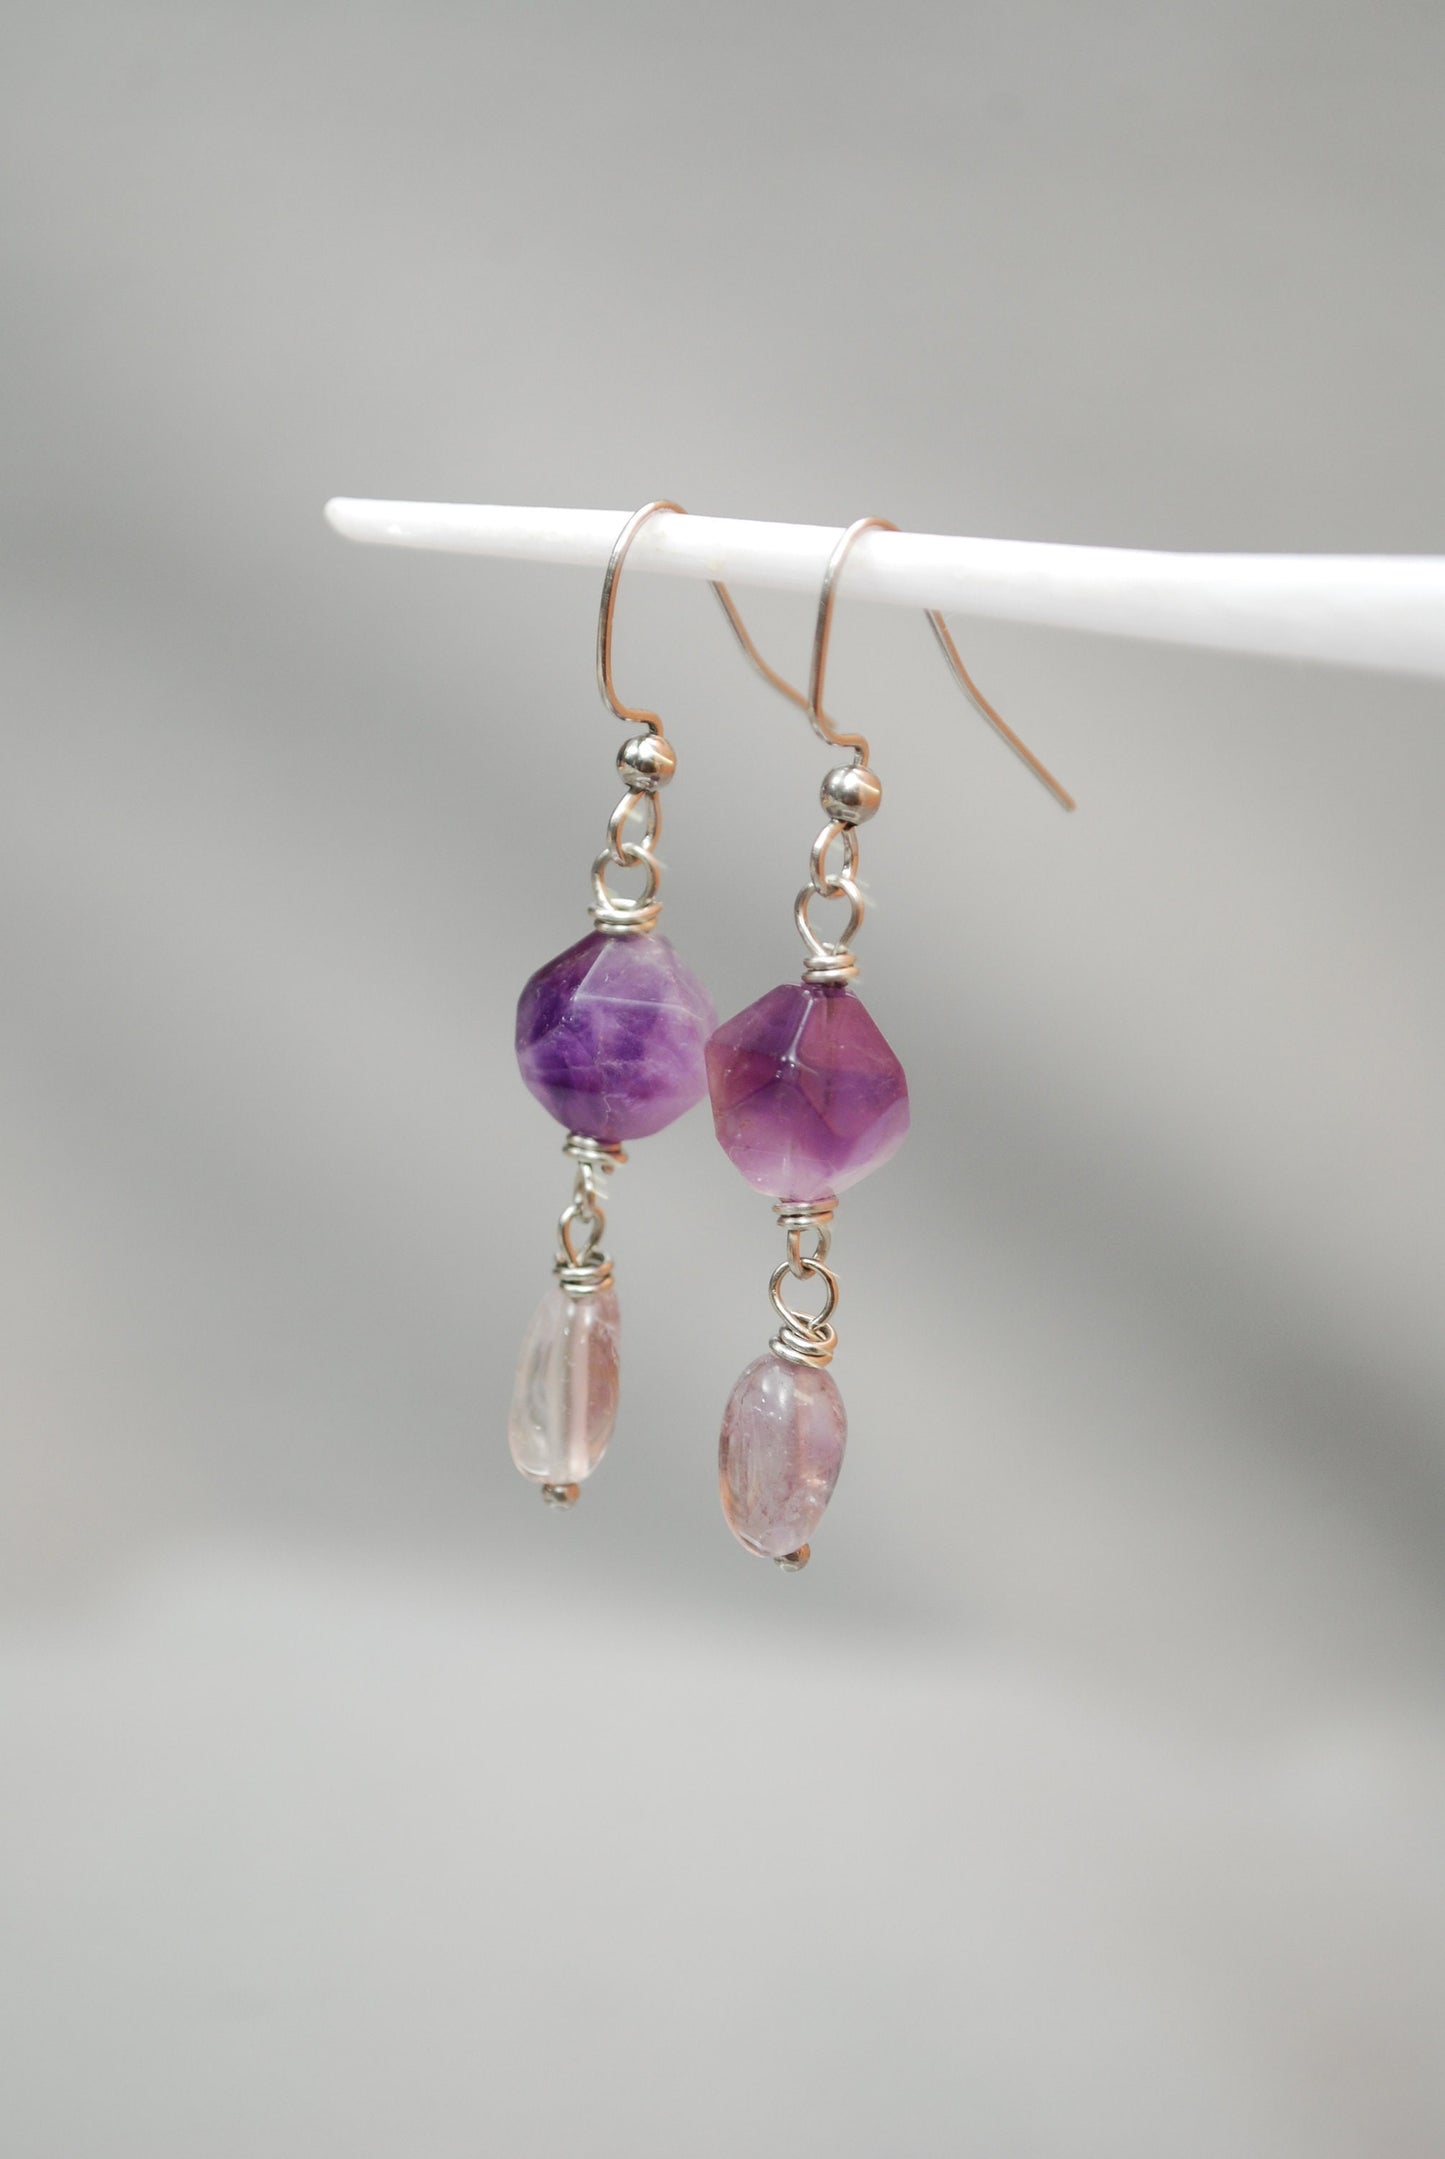 Unique Boho-chic earrings with Amethyst &  Super Seven stone bead. Estibela design. 4.8cm - 1.9". Elegant earrings for parties and cocktails